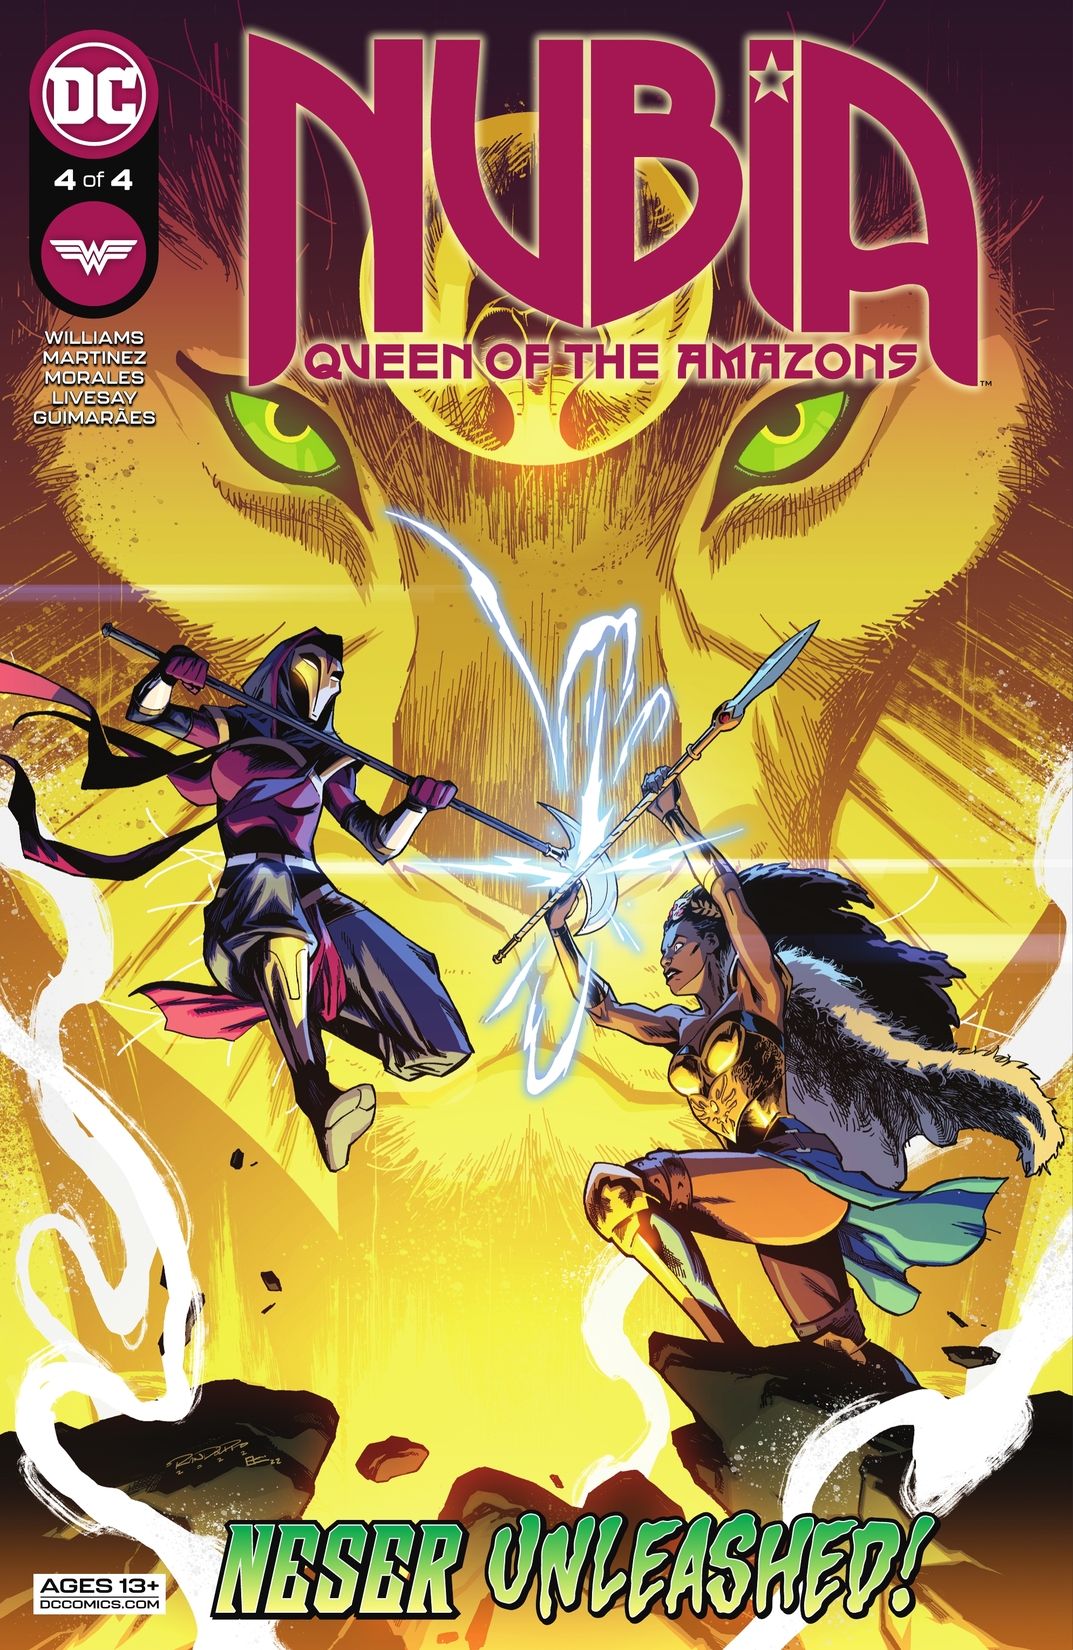 Nubia: Queen of the Amazons #4 preview images